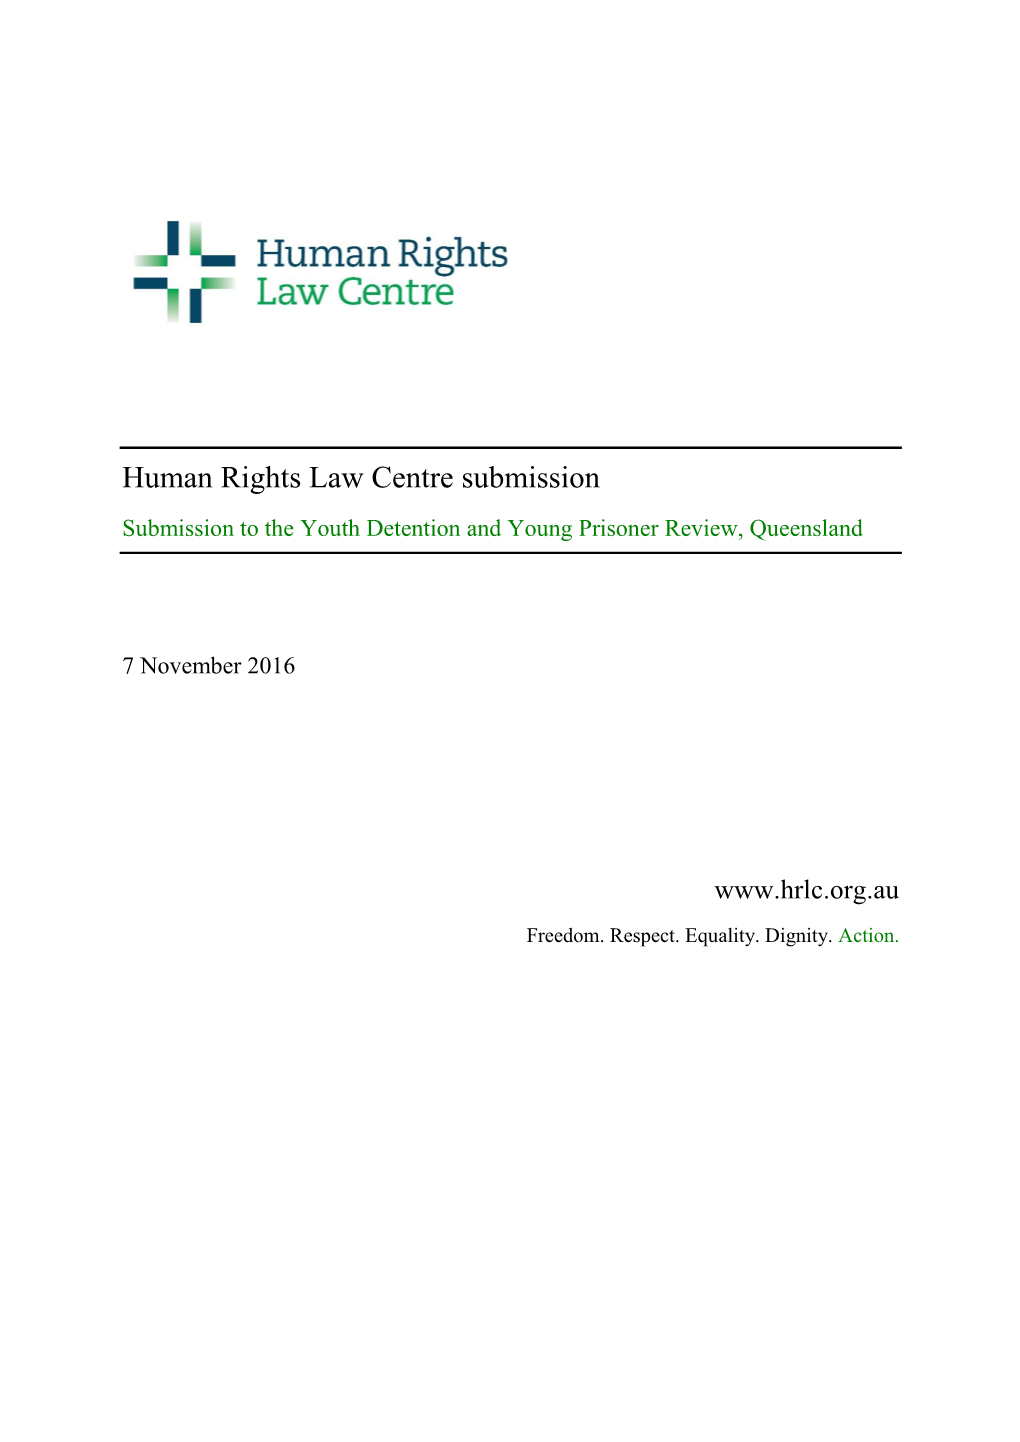 Human Rights Law Centre Submission Submission to the Youth Detention and Young Prisoner Review, Queensland